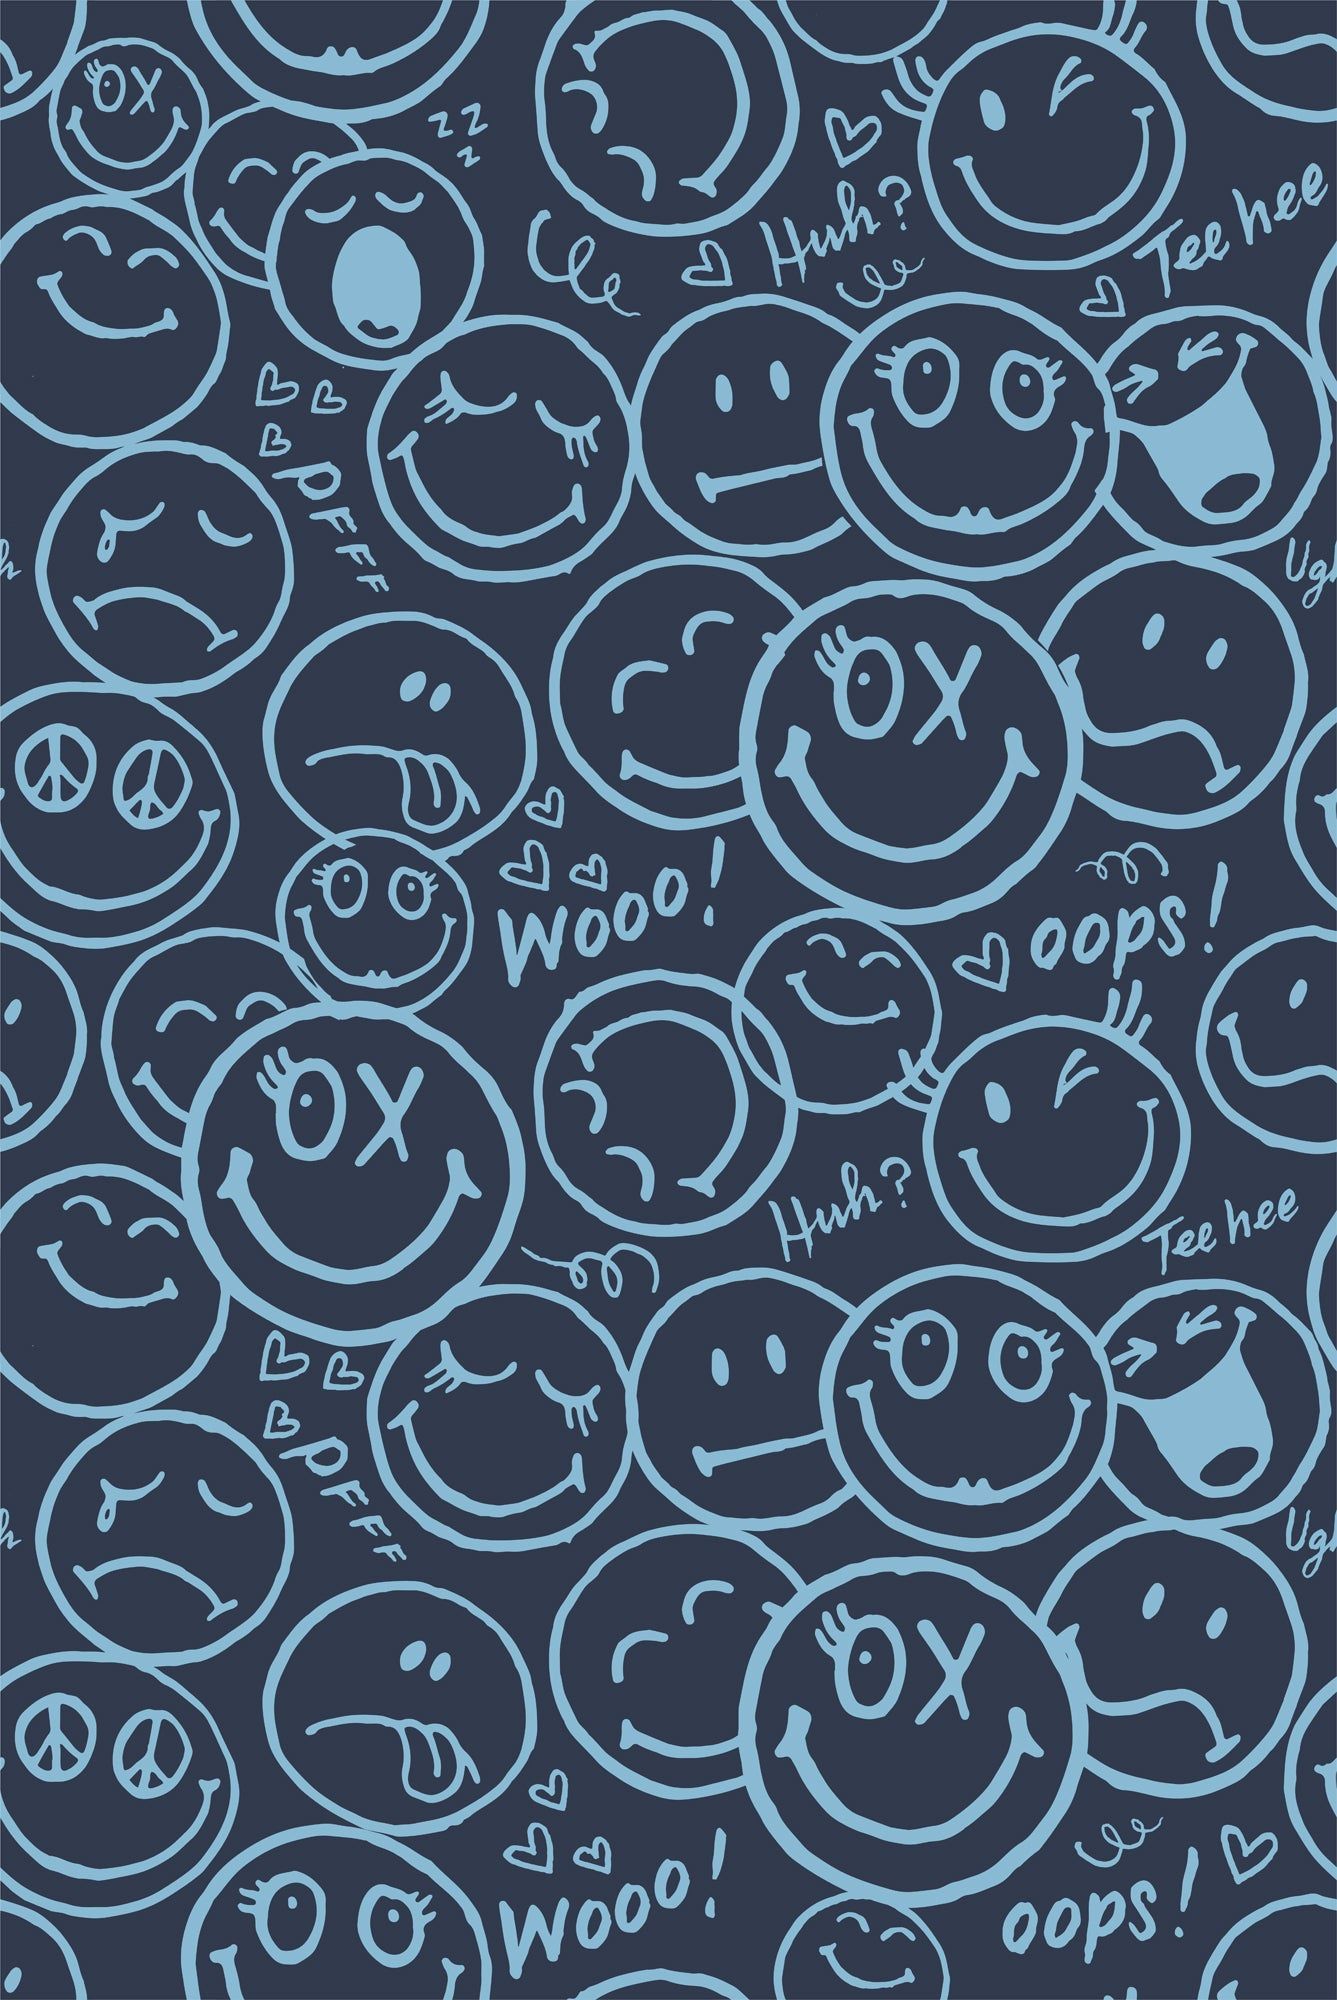 A pattern of different smiley faces in blue on a dark blue background - Smiley